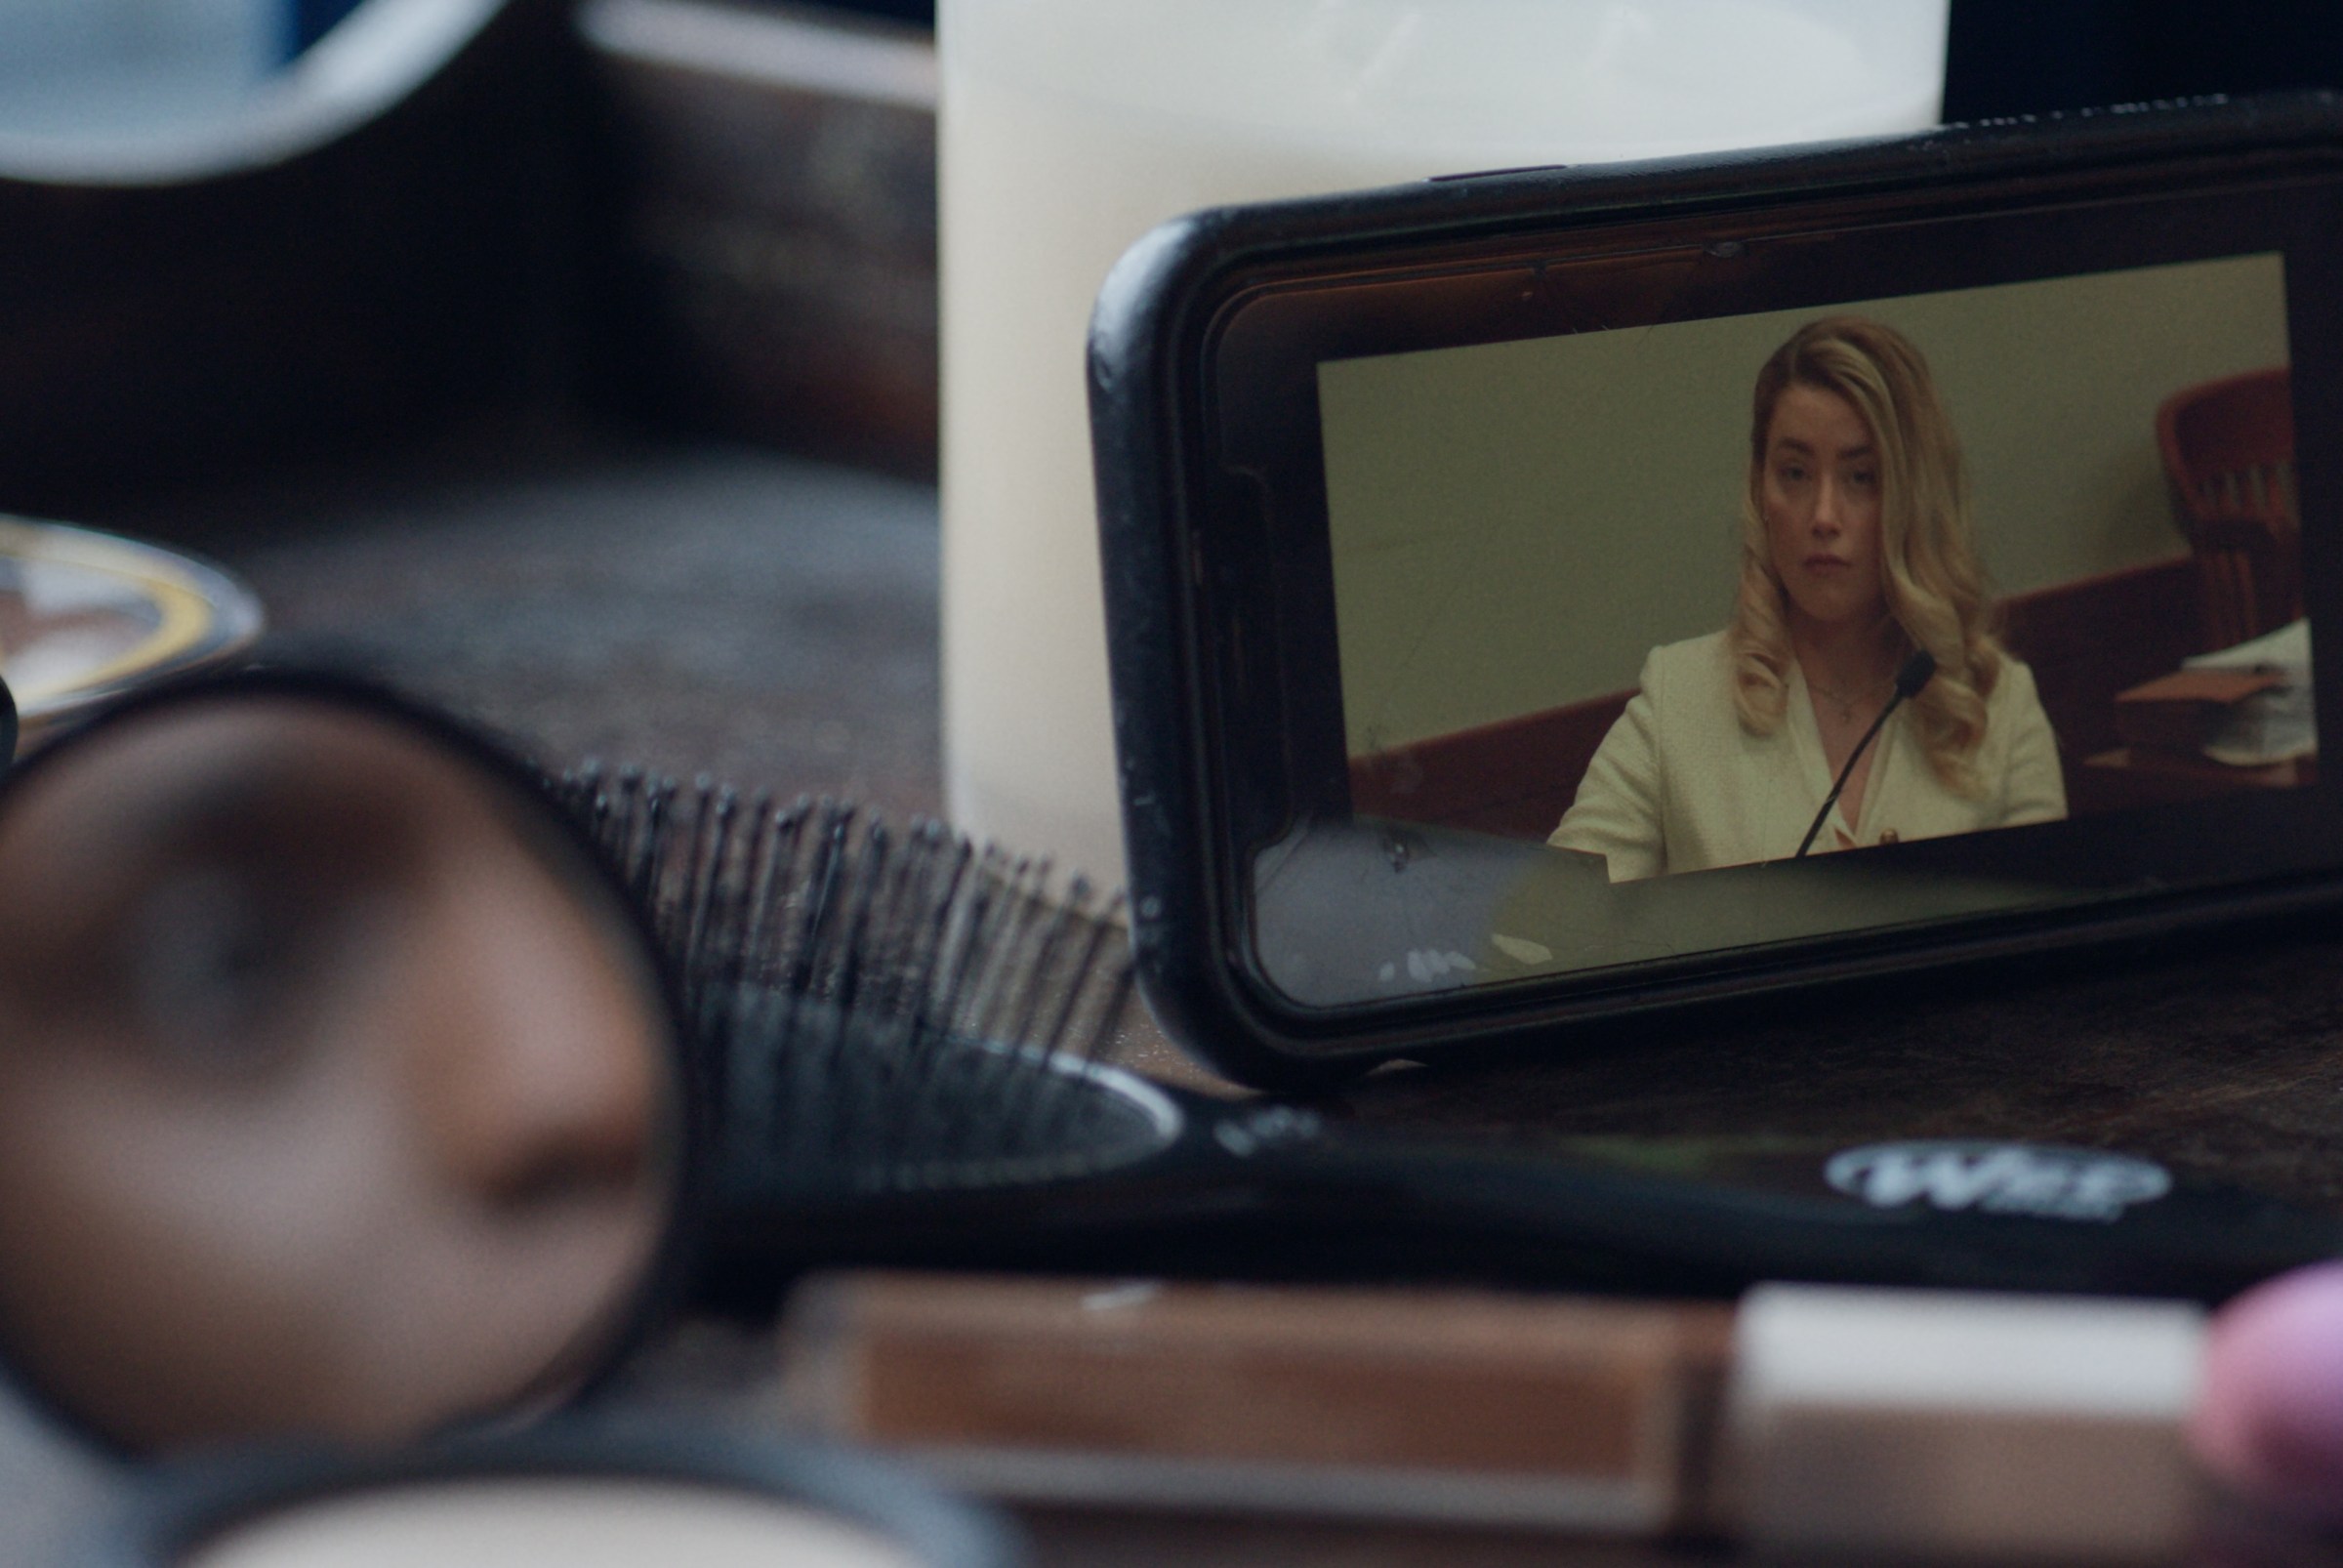 A camcorder screen showing a blonde woman on a witness stand.